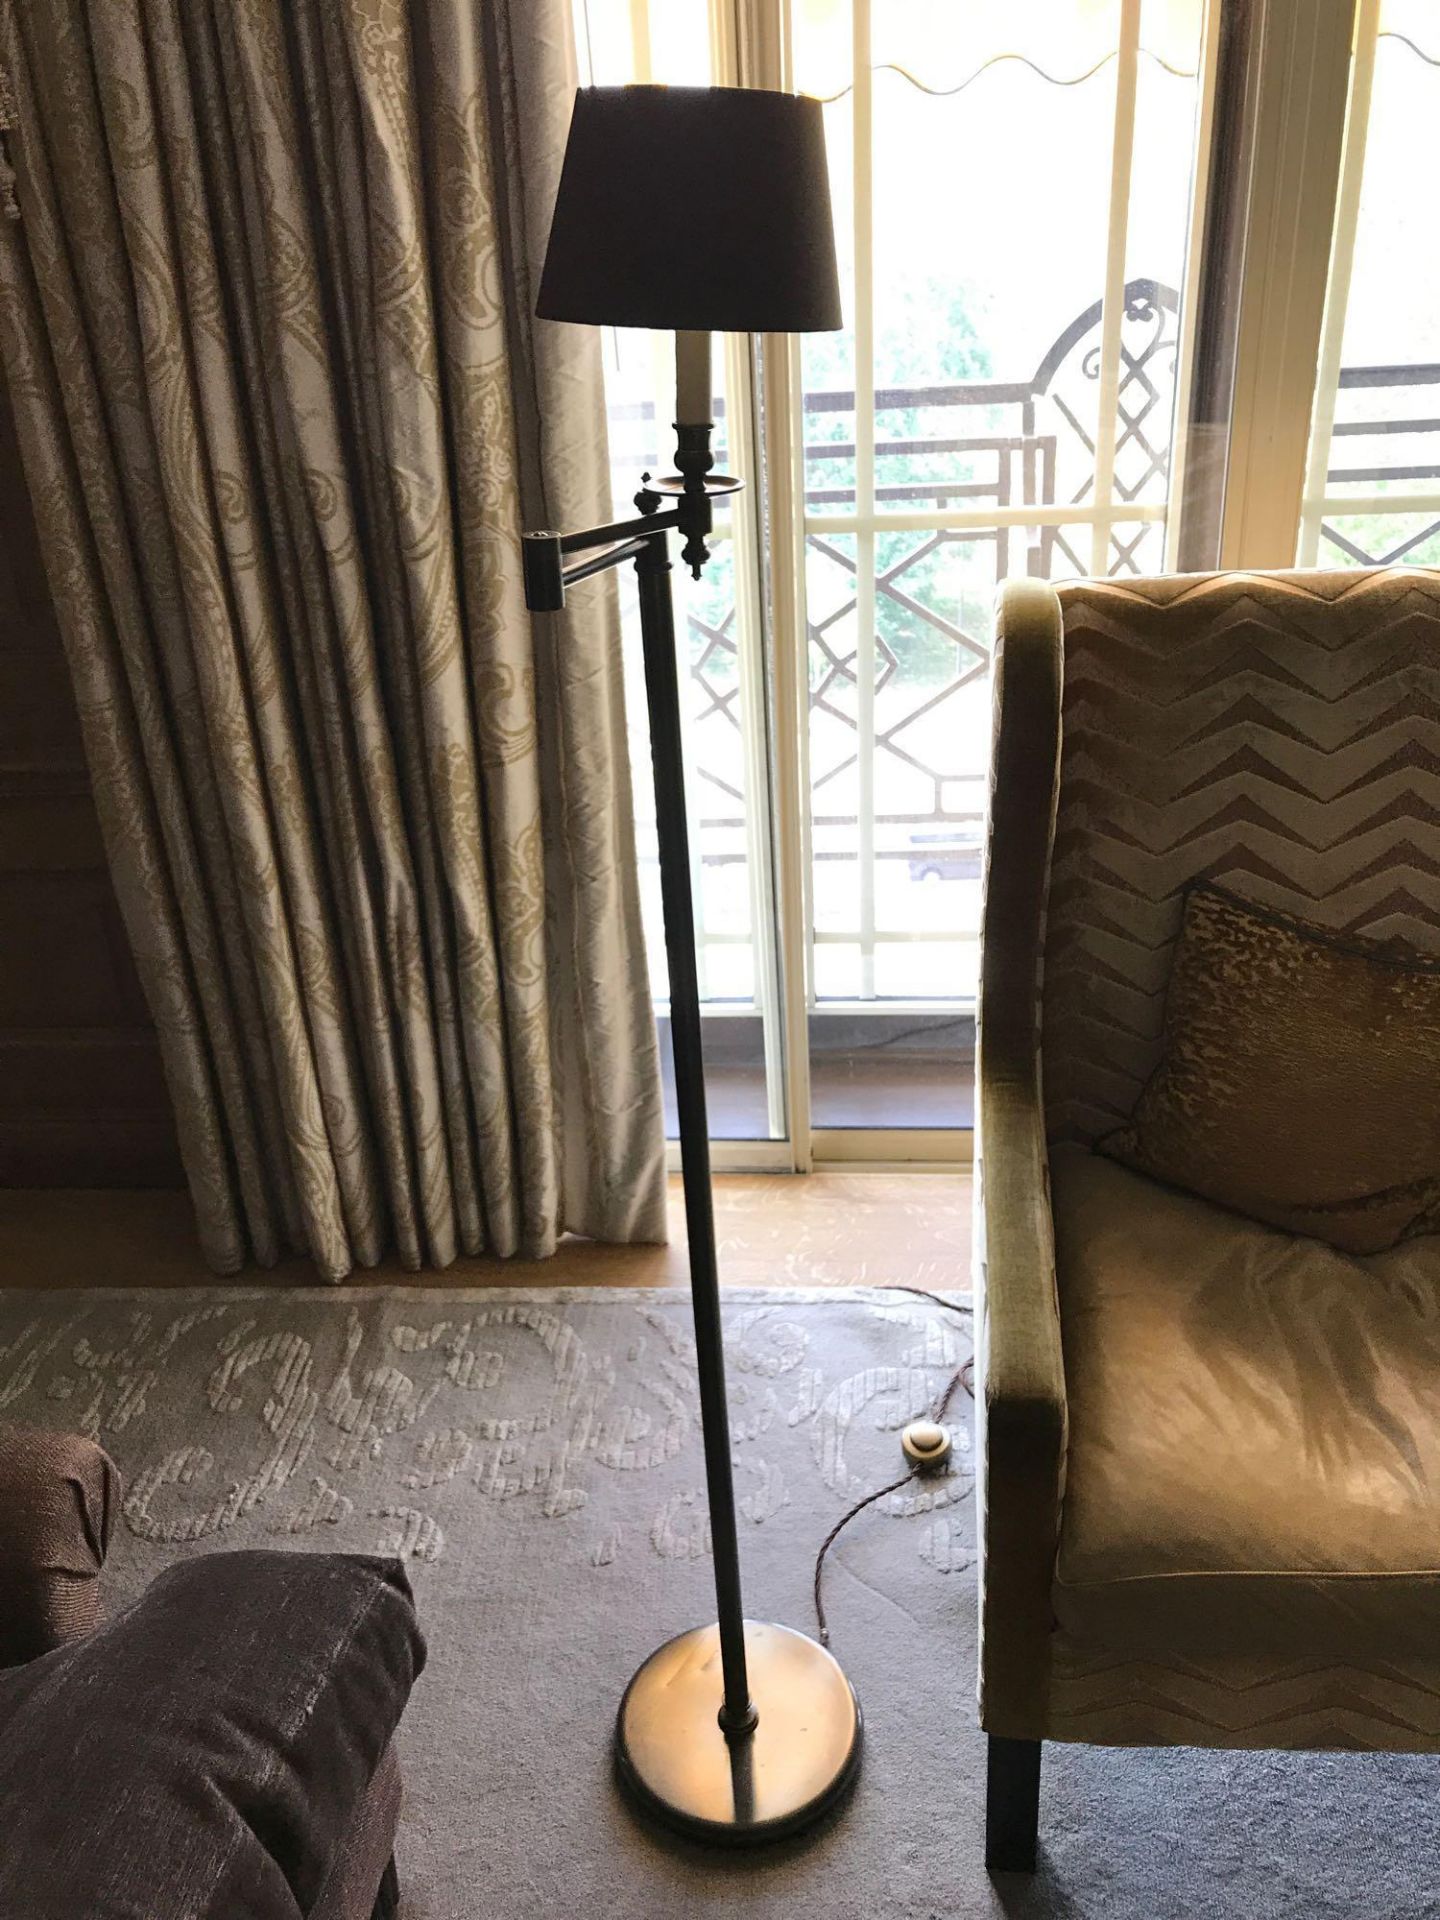 2 x Library Floor Lamp Finished In English Bronze Swing Arm Function With Shade 156cm Room 611 - Bild 2 aus 2